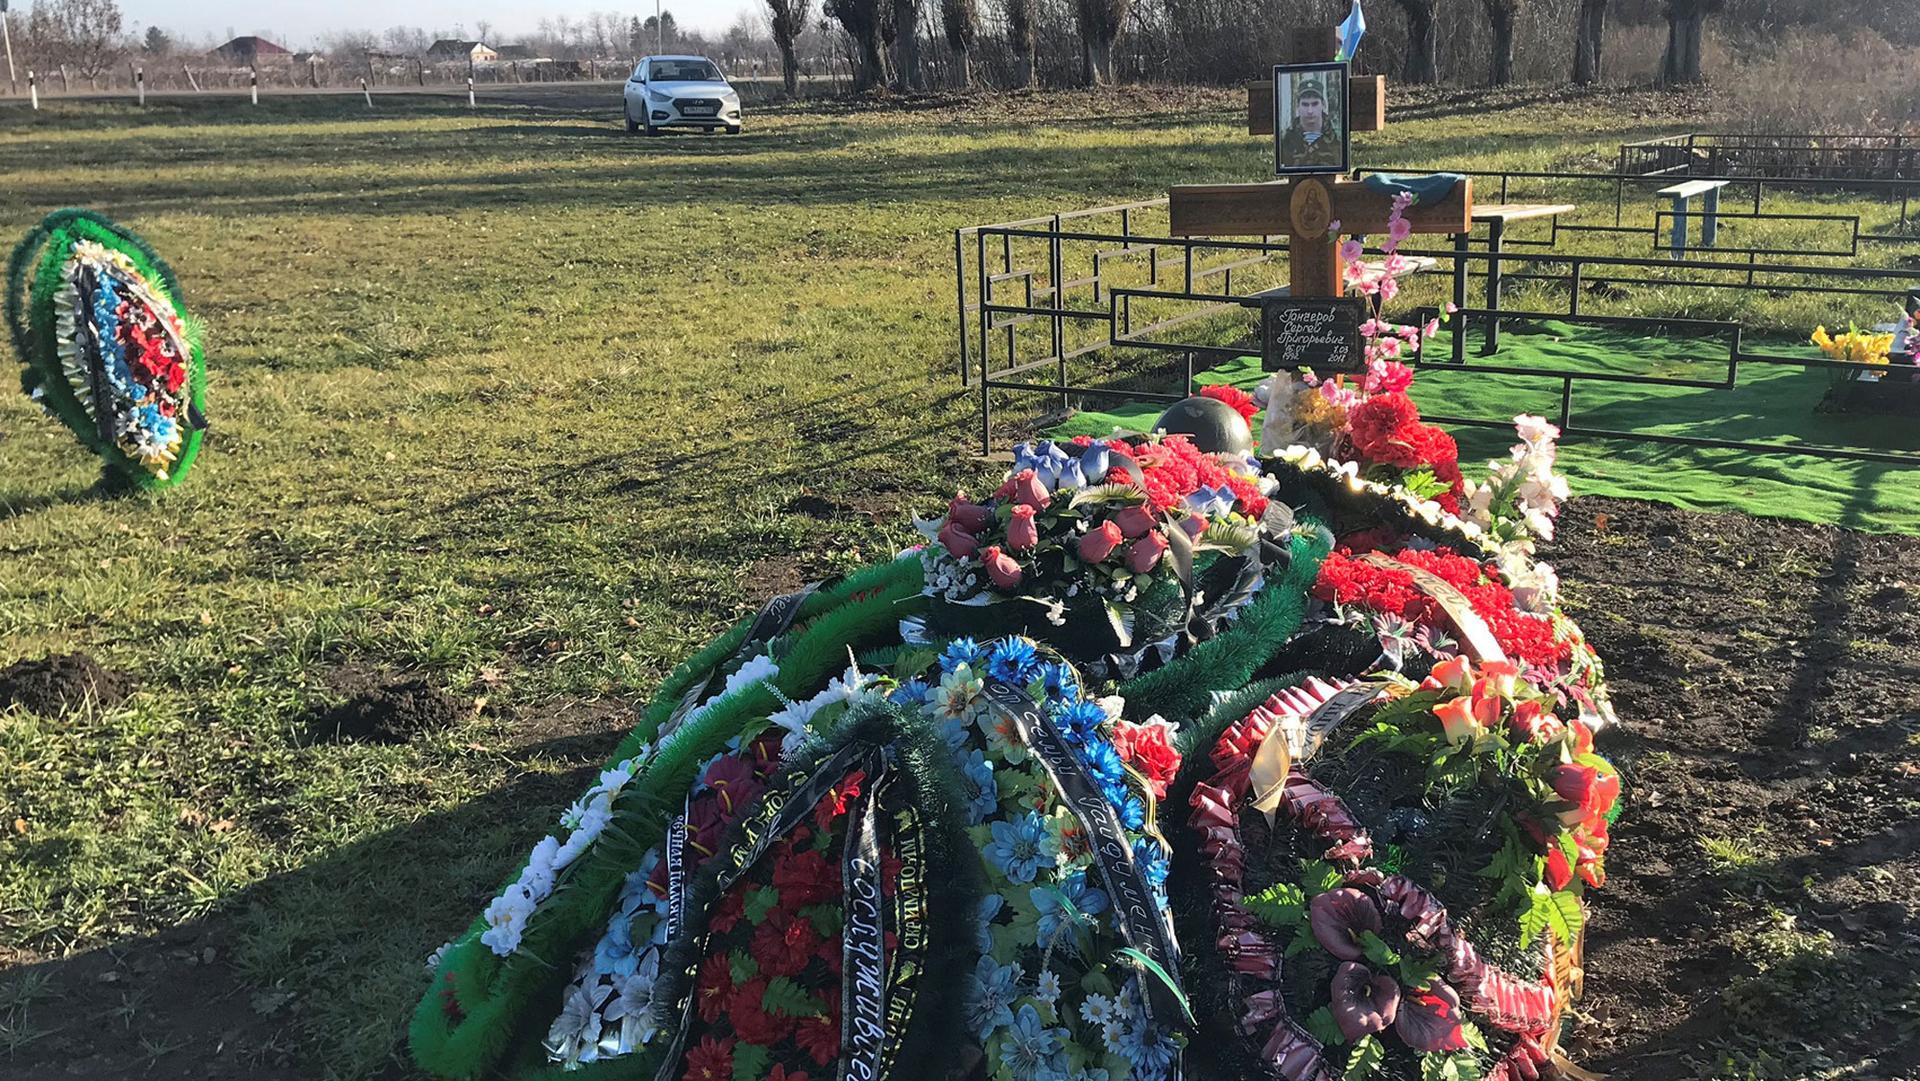 The grave of Russian private military contractor Sergei Gancherov is shown adorned with flowers and his photograph on a cross.